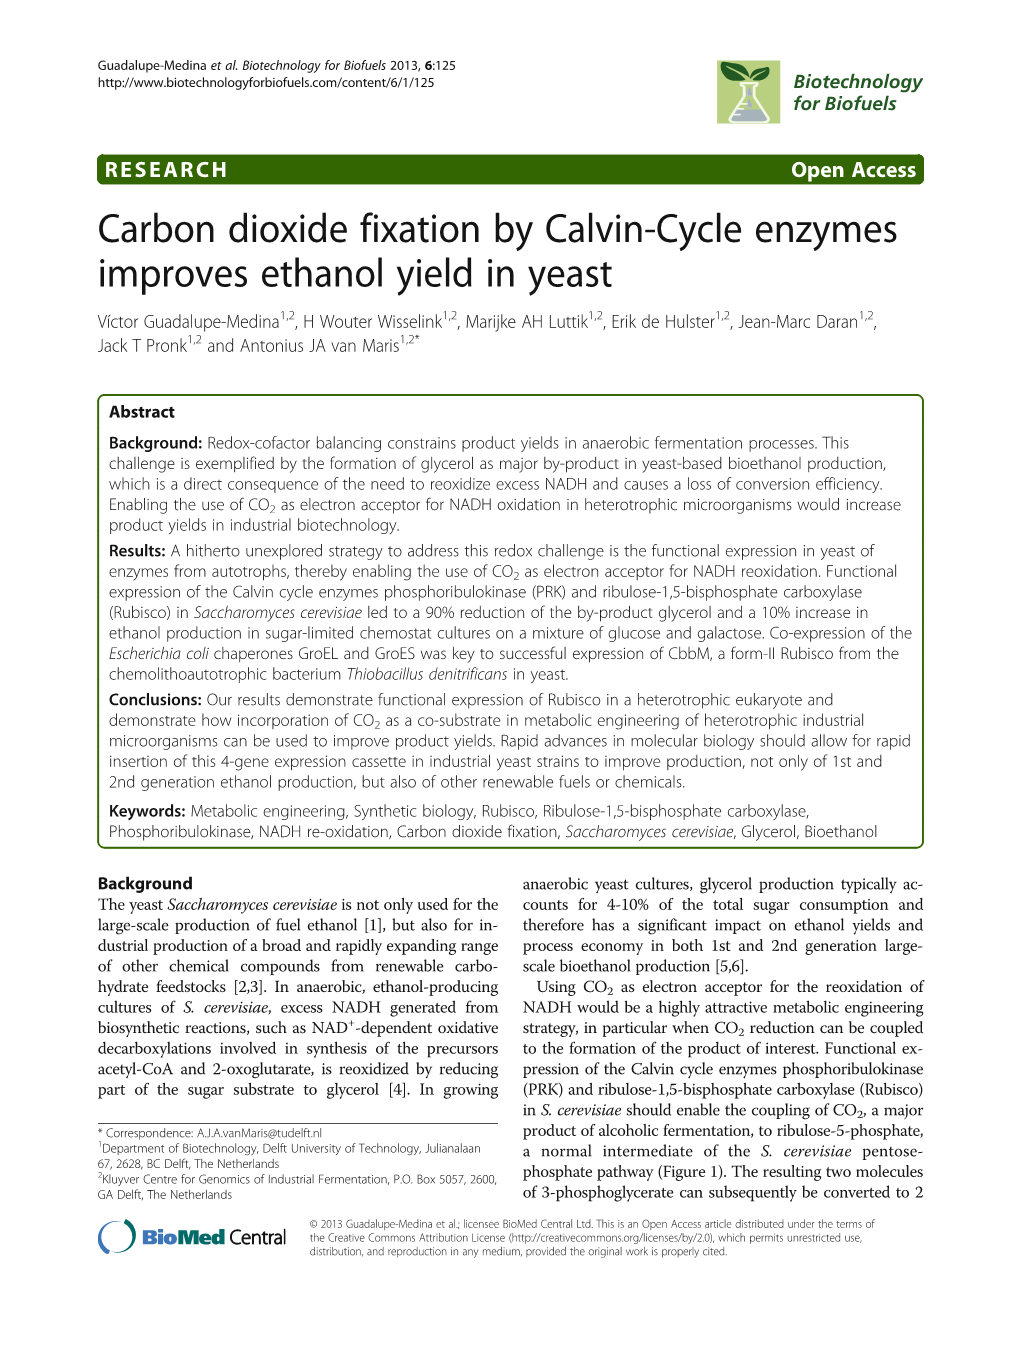 Carbon Dioxide Fixation by Calvin-Cycle Enzymes Improves